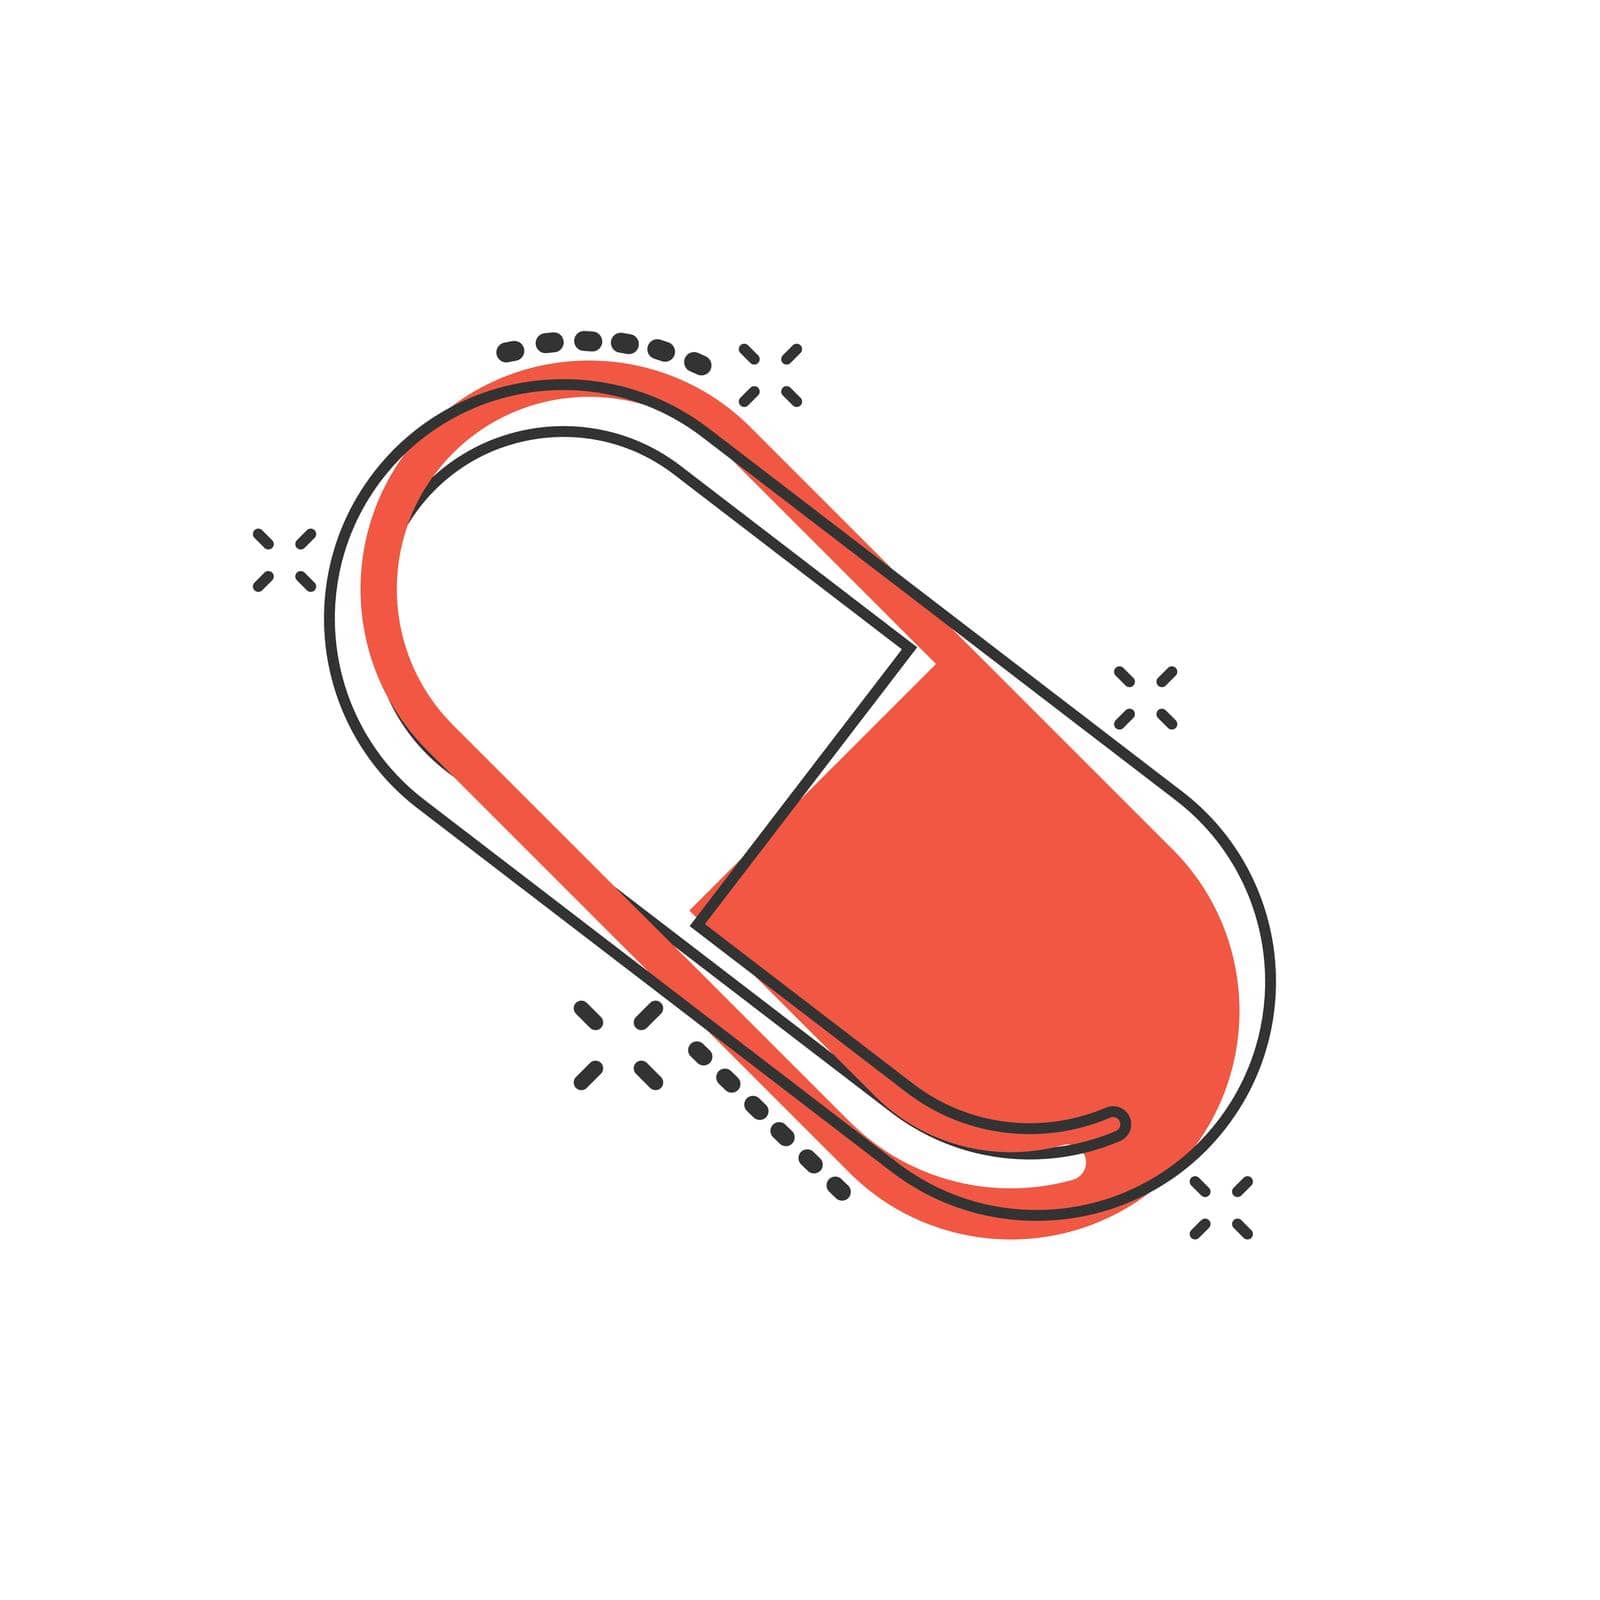 Pill capsule icon in comic style. Drugs cartoon vector illustration on white isolated background. Pharmacy splash effect business concept.